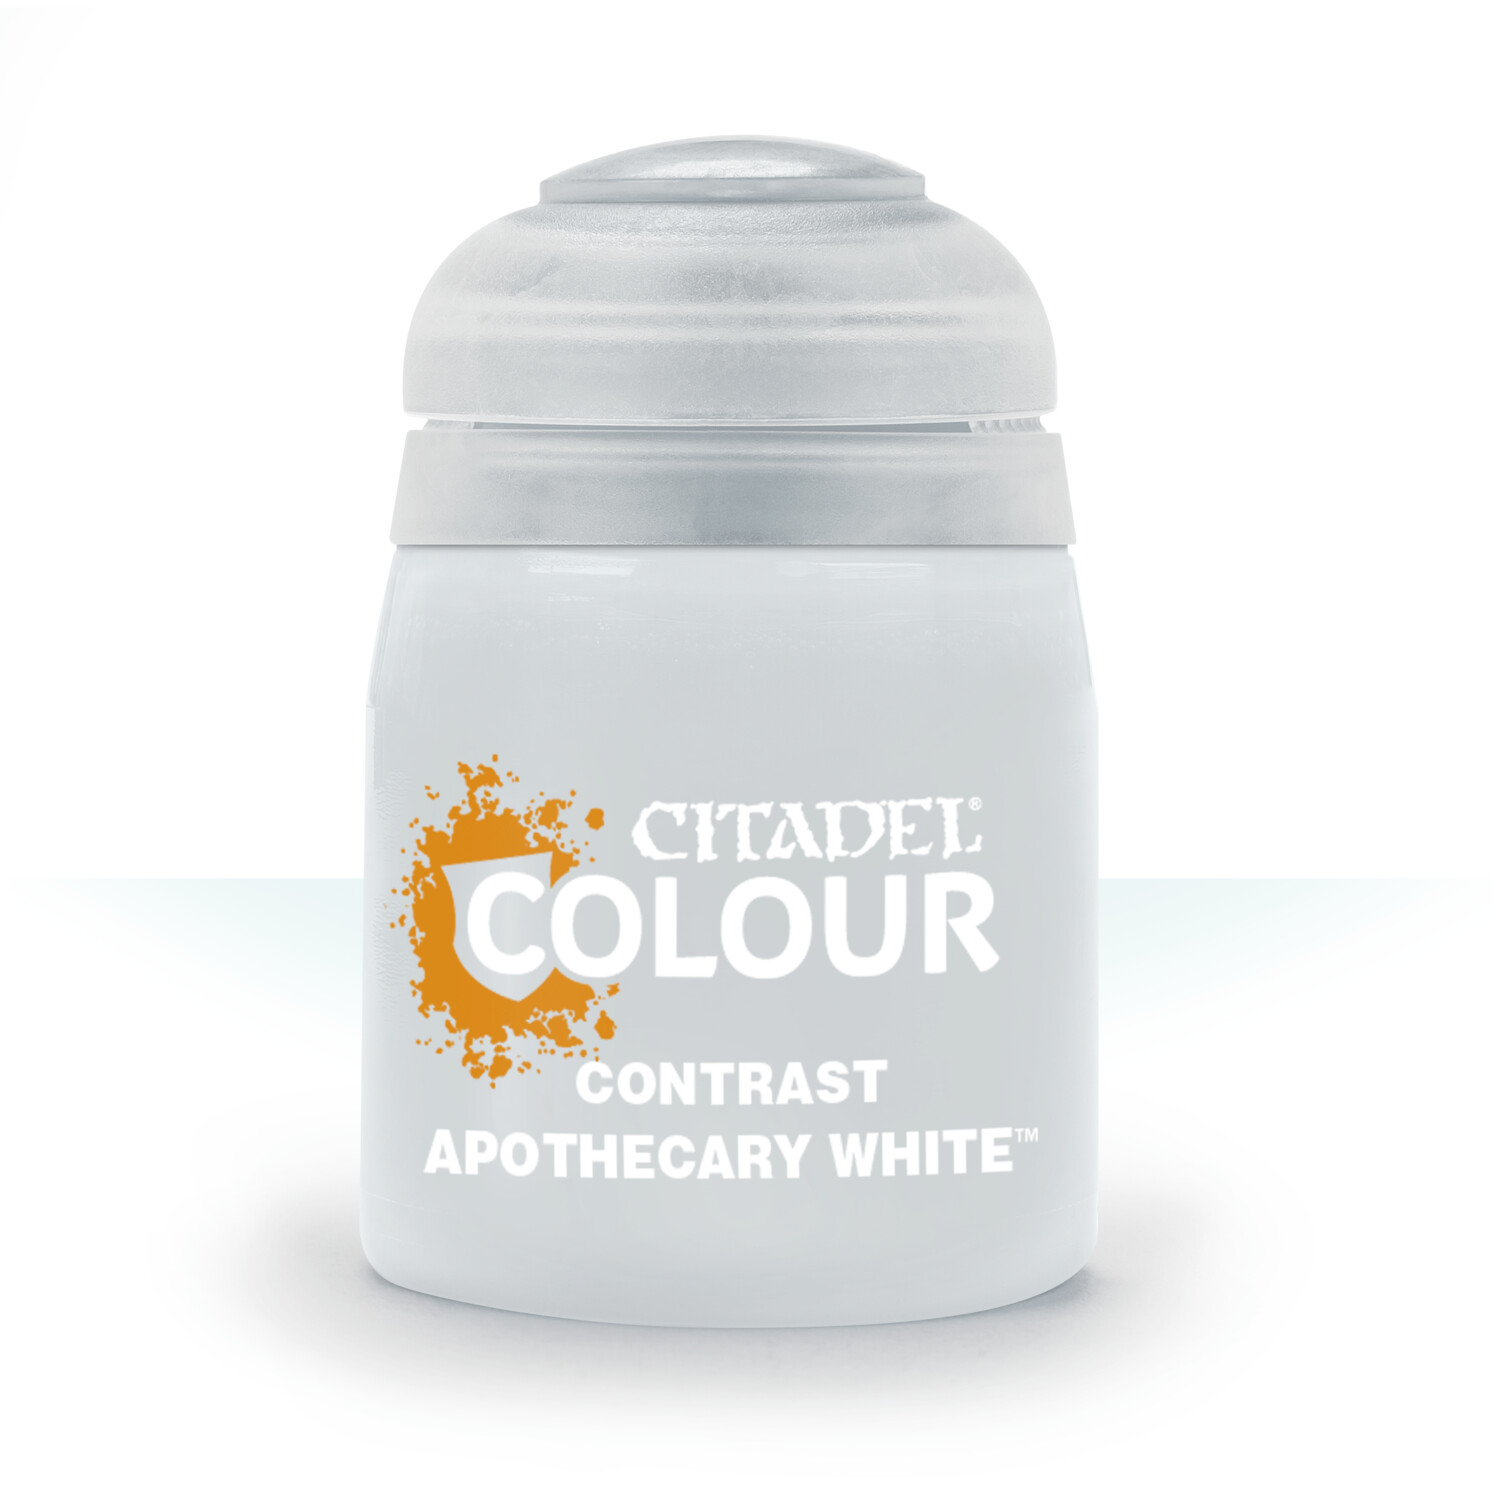 (Contrast) Apothecary White